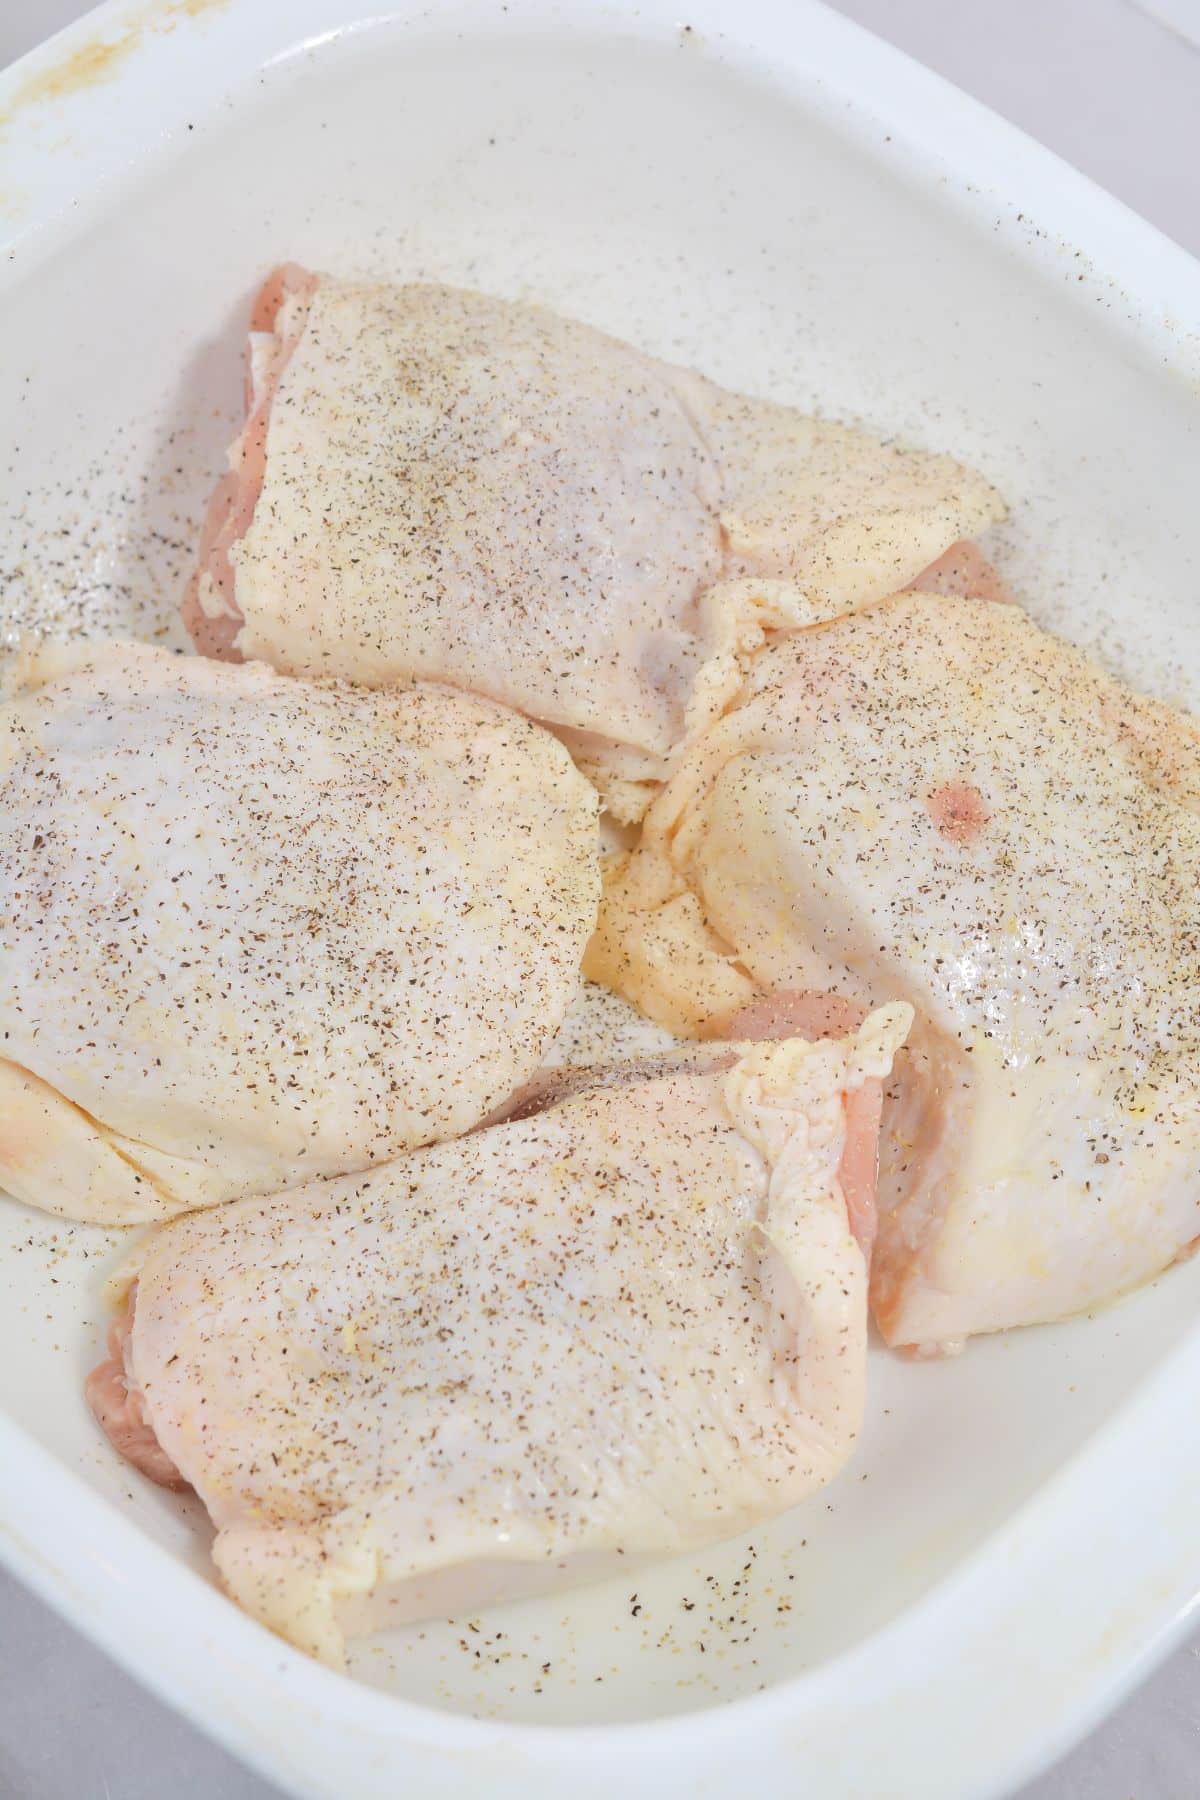 Chicken in the baking dish seasoned with pepper.